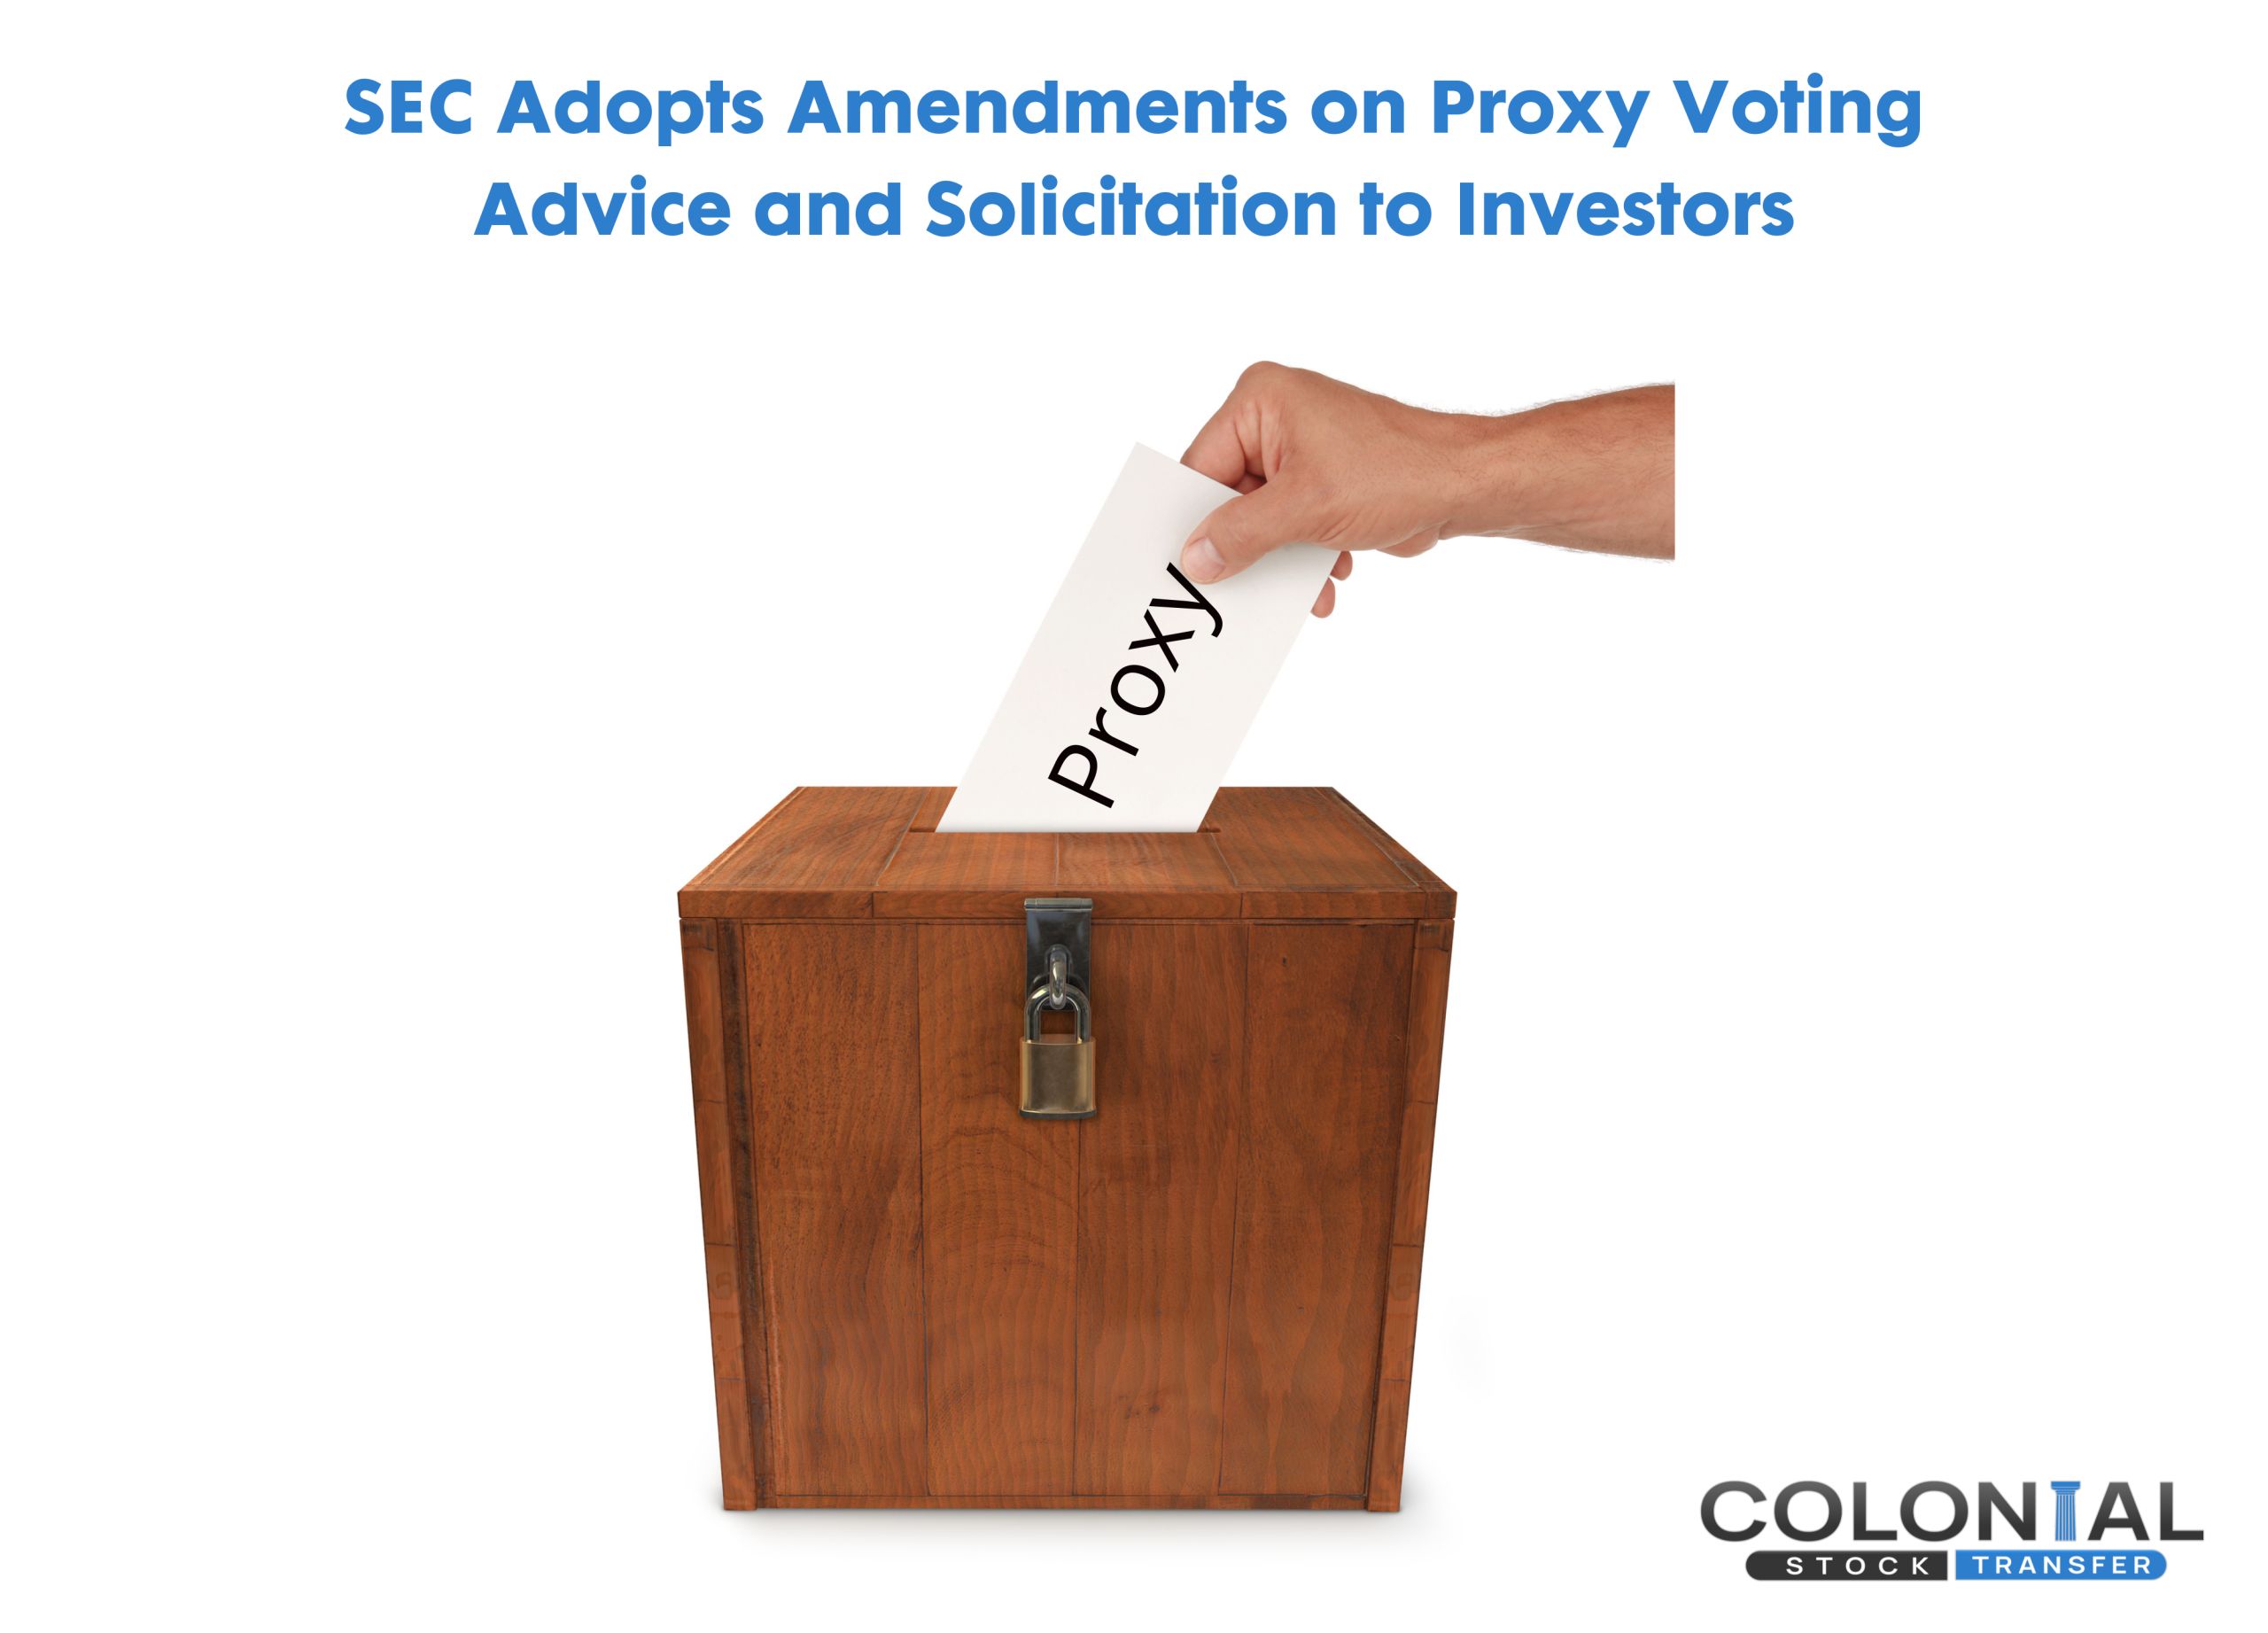 SEC Adopts Amendments on Proxy Voting Advice and Solicitation to Investors